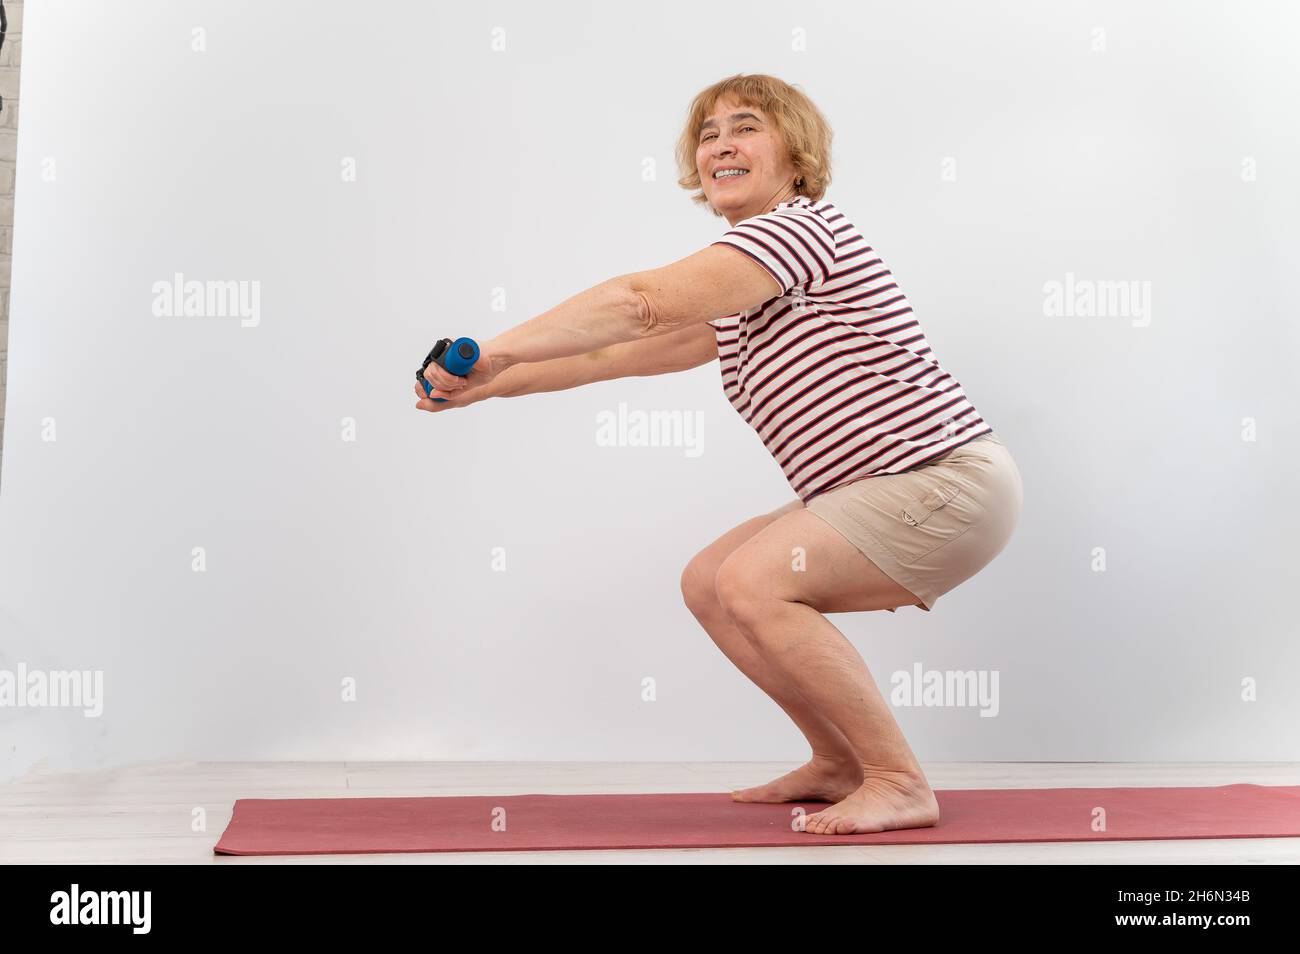 https://c8.alamy.com/comp/2H6N34B/elderly-woman-doing-squats-on-a-white-background-the-old-lady-is-doing-exercises-for-her-health-2H6N34B.jpg